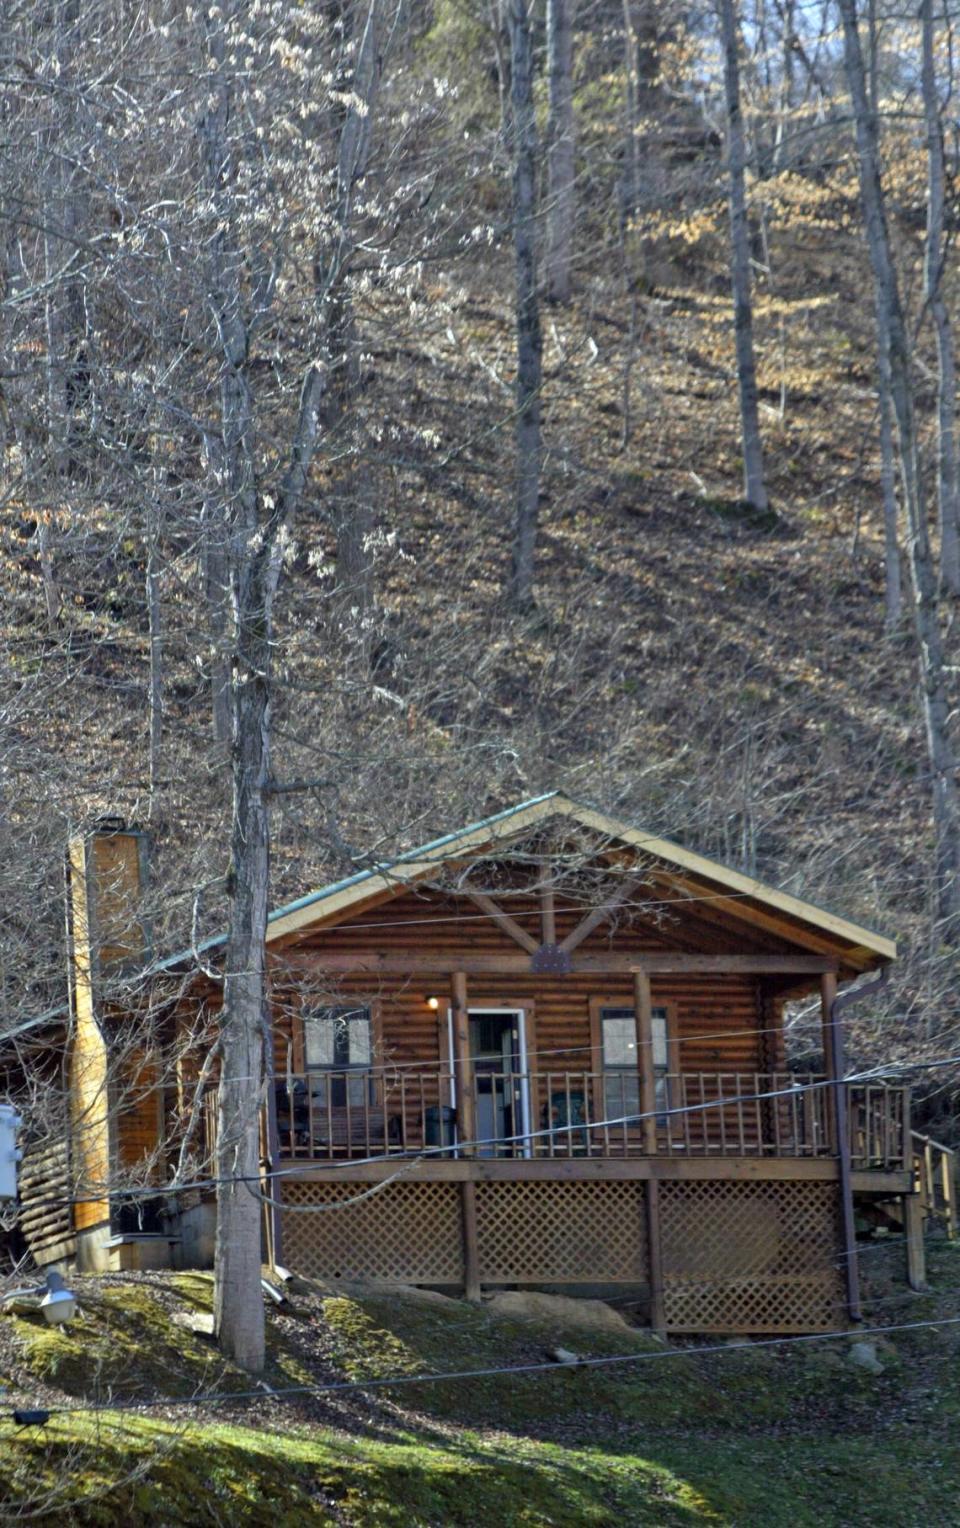 PHOTO BY: ALLISON LONG/KANSAS CITY STAR 022606 The cabin in Alpine , Tenn., were Toby Young and John Manard stayed for 12 days after Young helped Manard escape from prison in Lansing, Kan. cutline: Authorities said they thought Toby Young and John Manard picked this cabin based on its remoteness - it’s one of several log cabins that make up a fishing resort on Dale Hollow Lake.